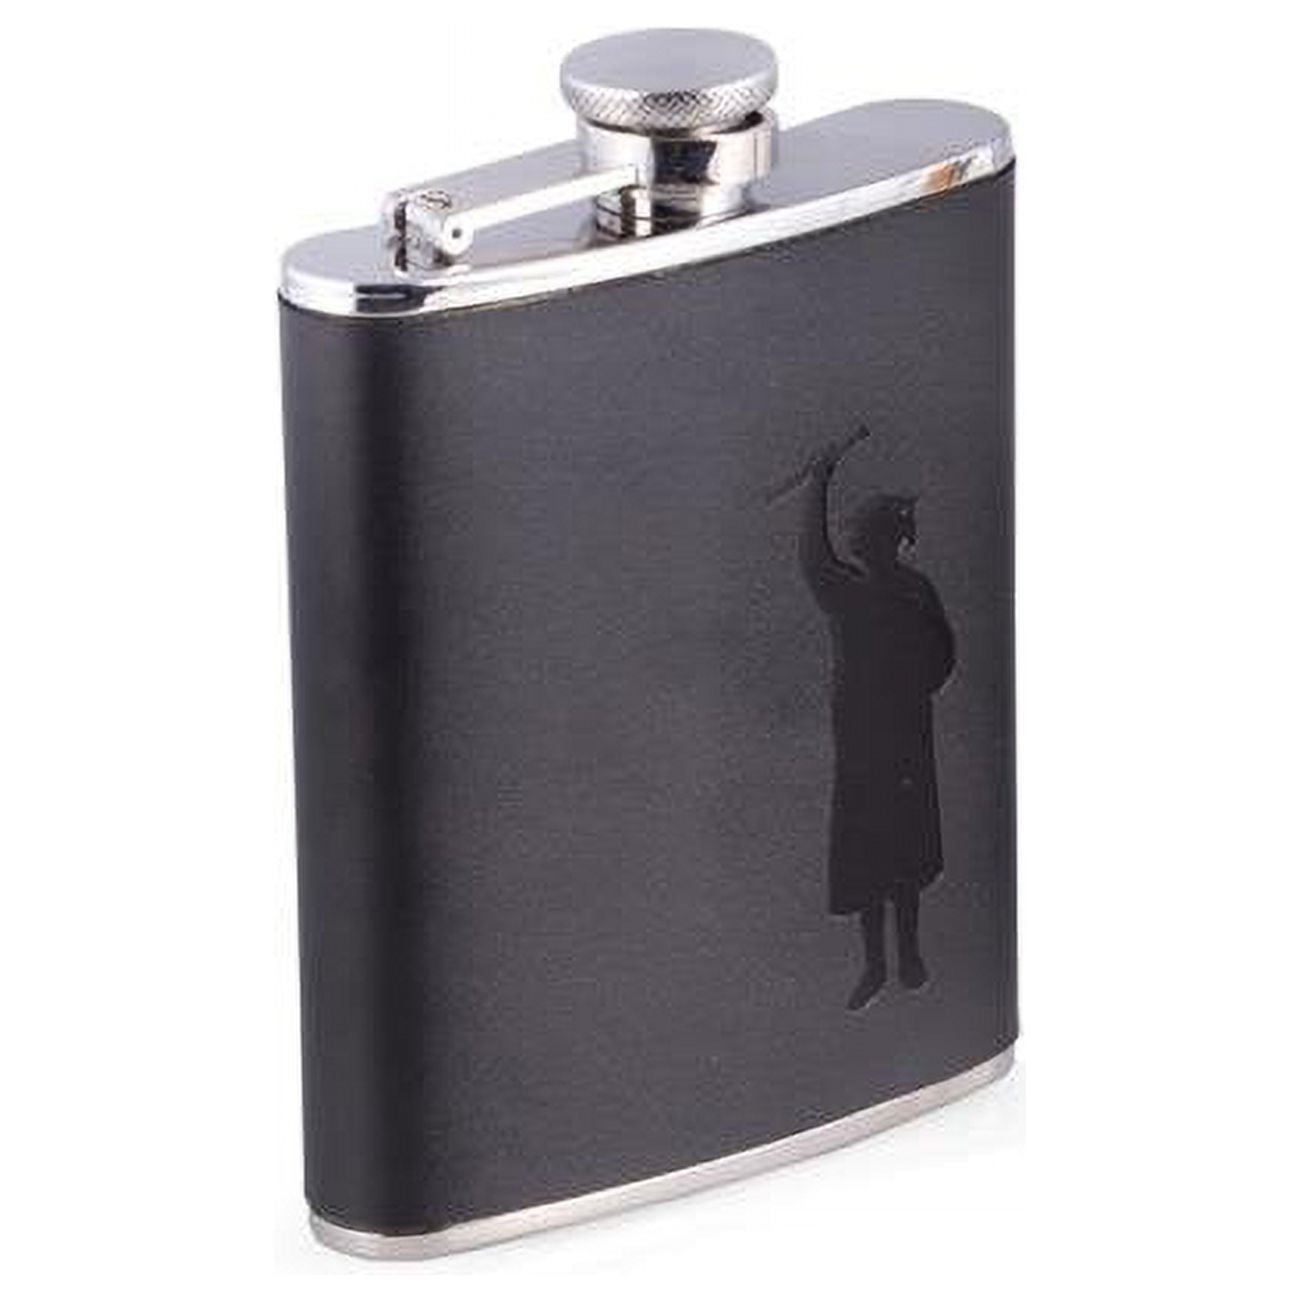 Picture of Bey-Berk International FS116G 6 oz Stainless Steel Leather Graduation Flask with Captive Cap &amp; Durable Rubber Seal - Black &amp; Silver